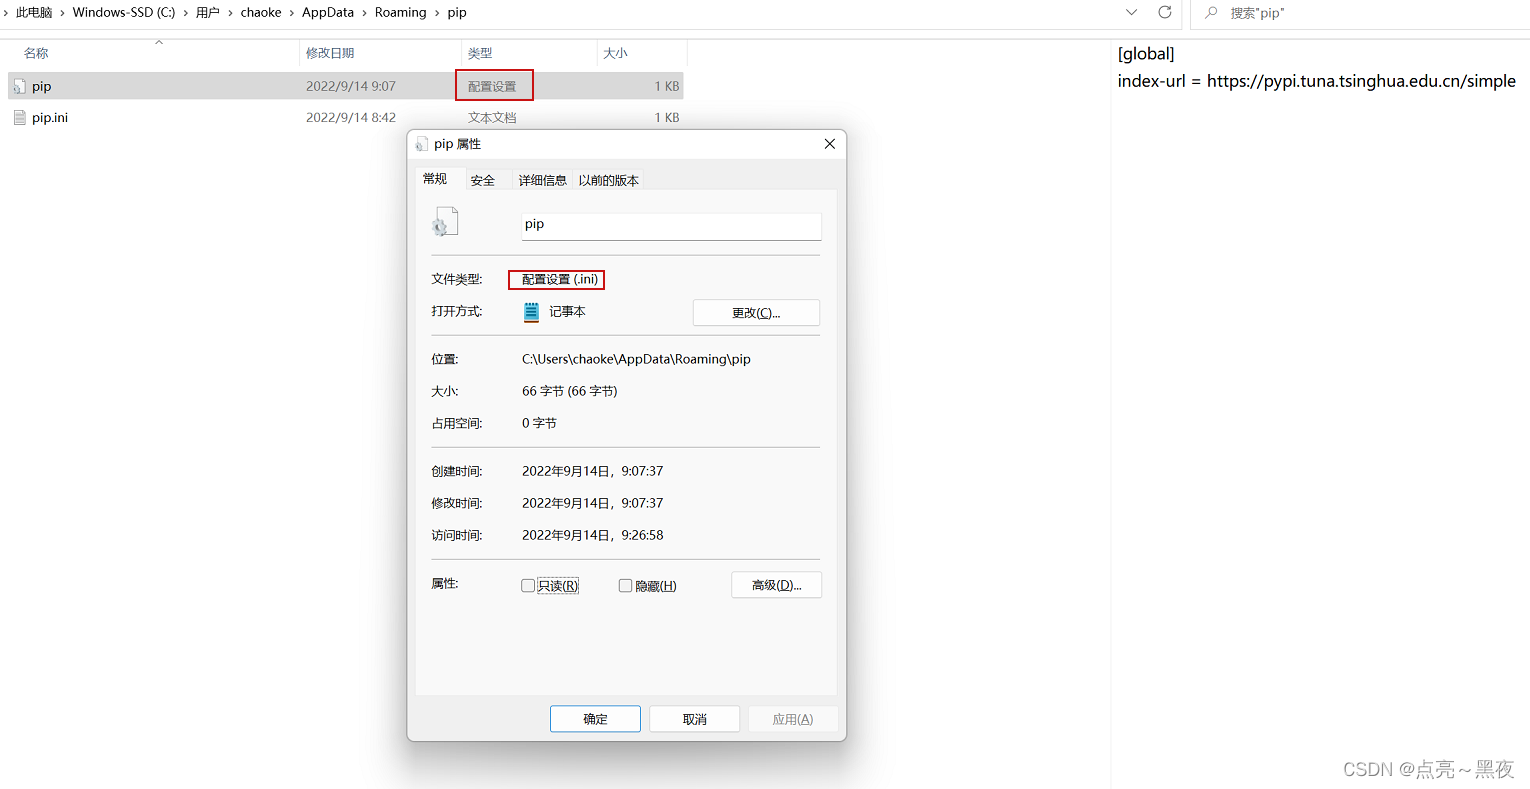 Windows python pip换源不生效（window11系统），以及pip下载库包报错 because normal site-packages is not writeable